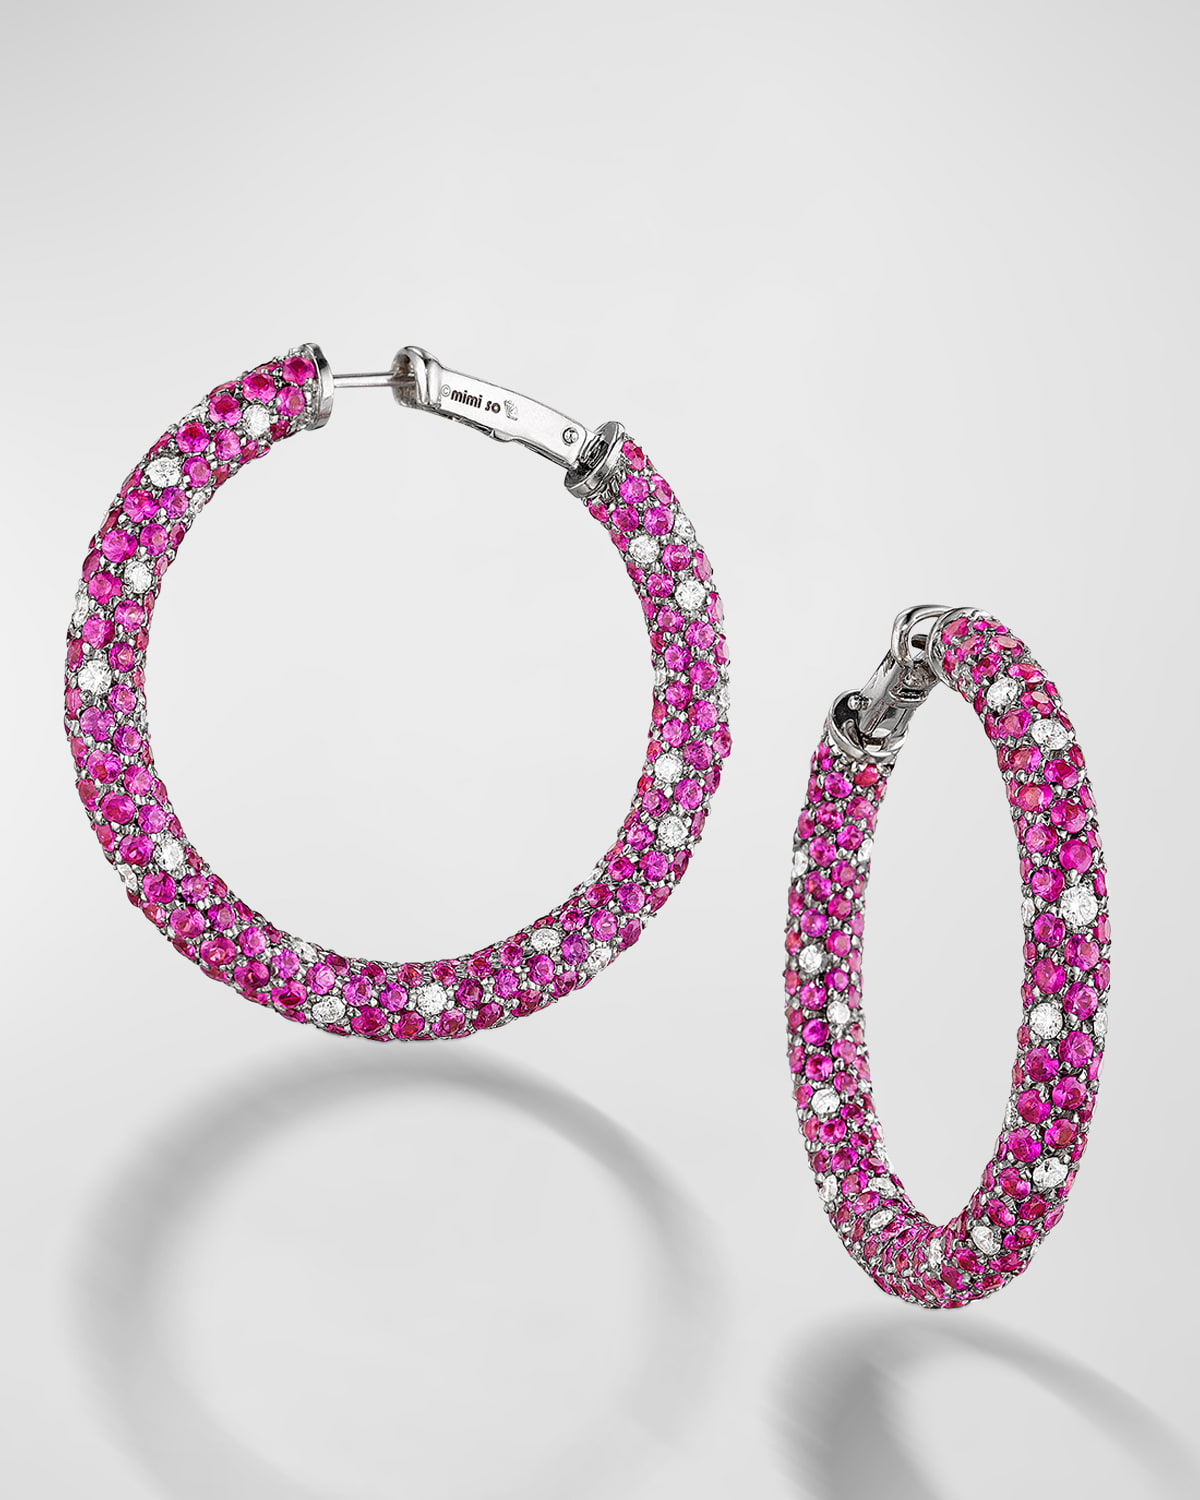 18K White Gold Couture Pave Hoop Earrings with Pink Sapphires and Diamonds